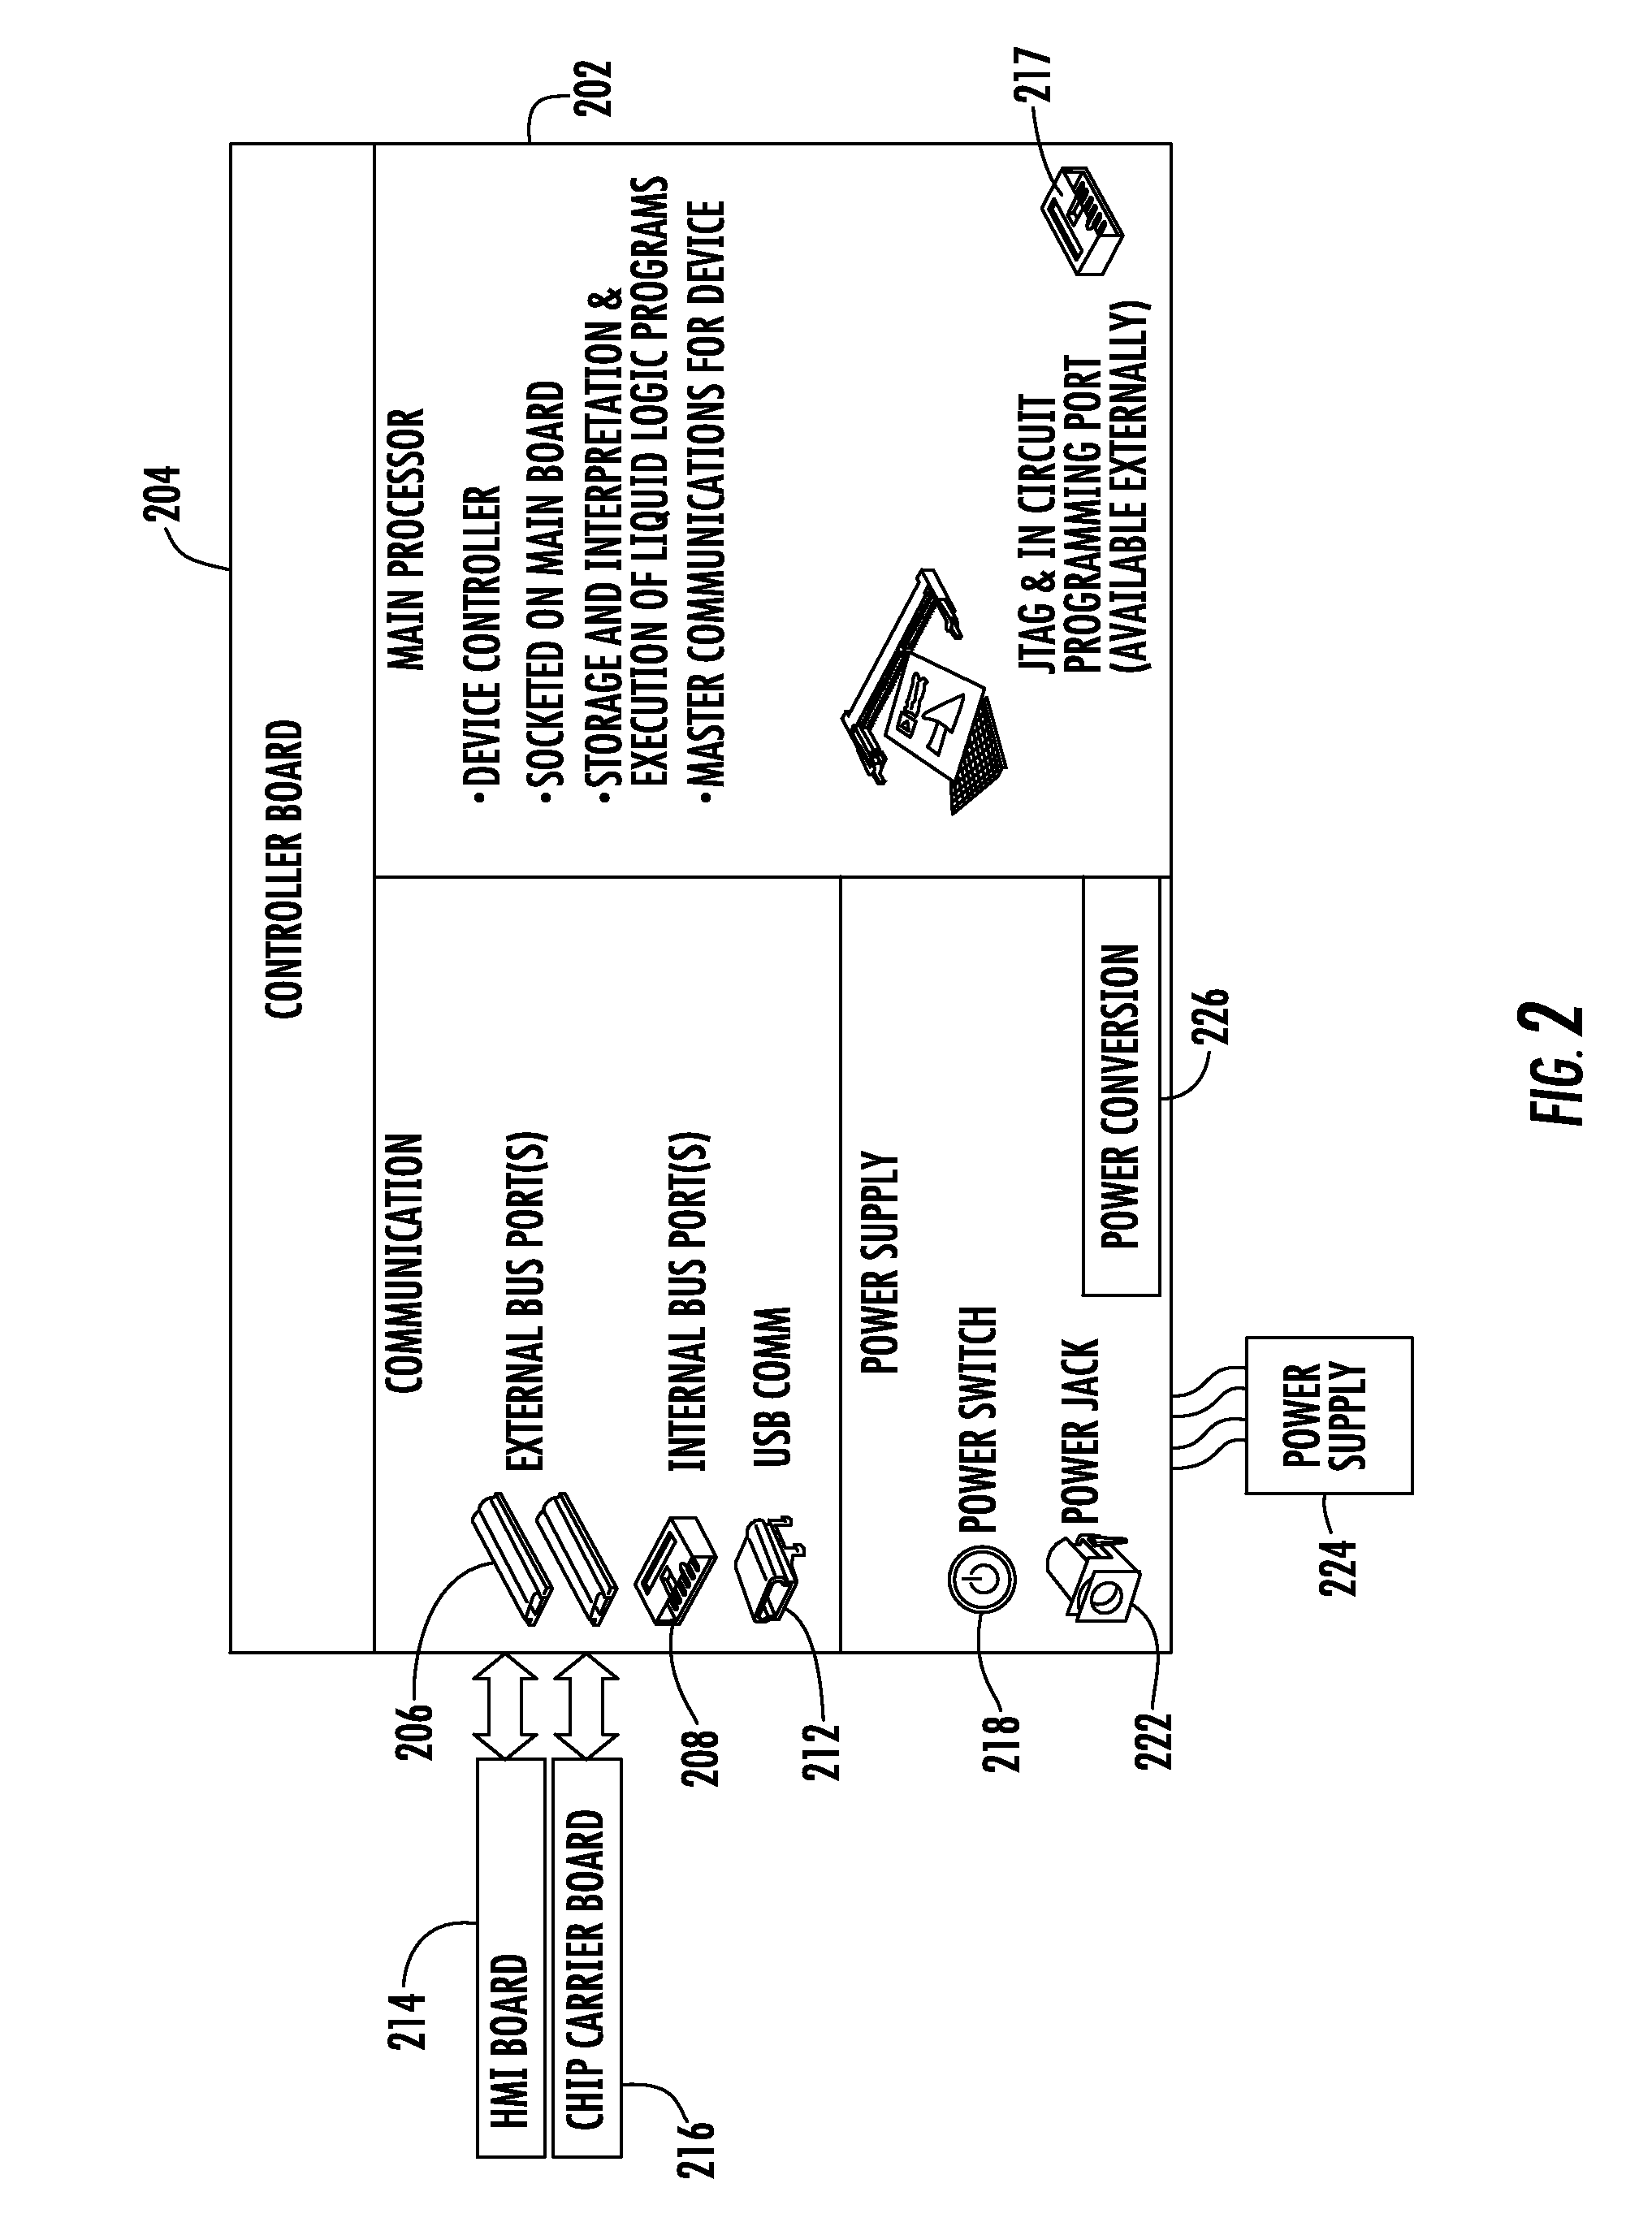 System for Controlling a Droplet Actuator